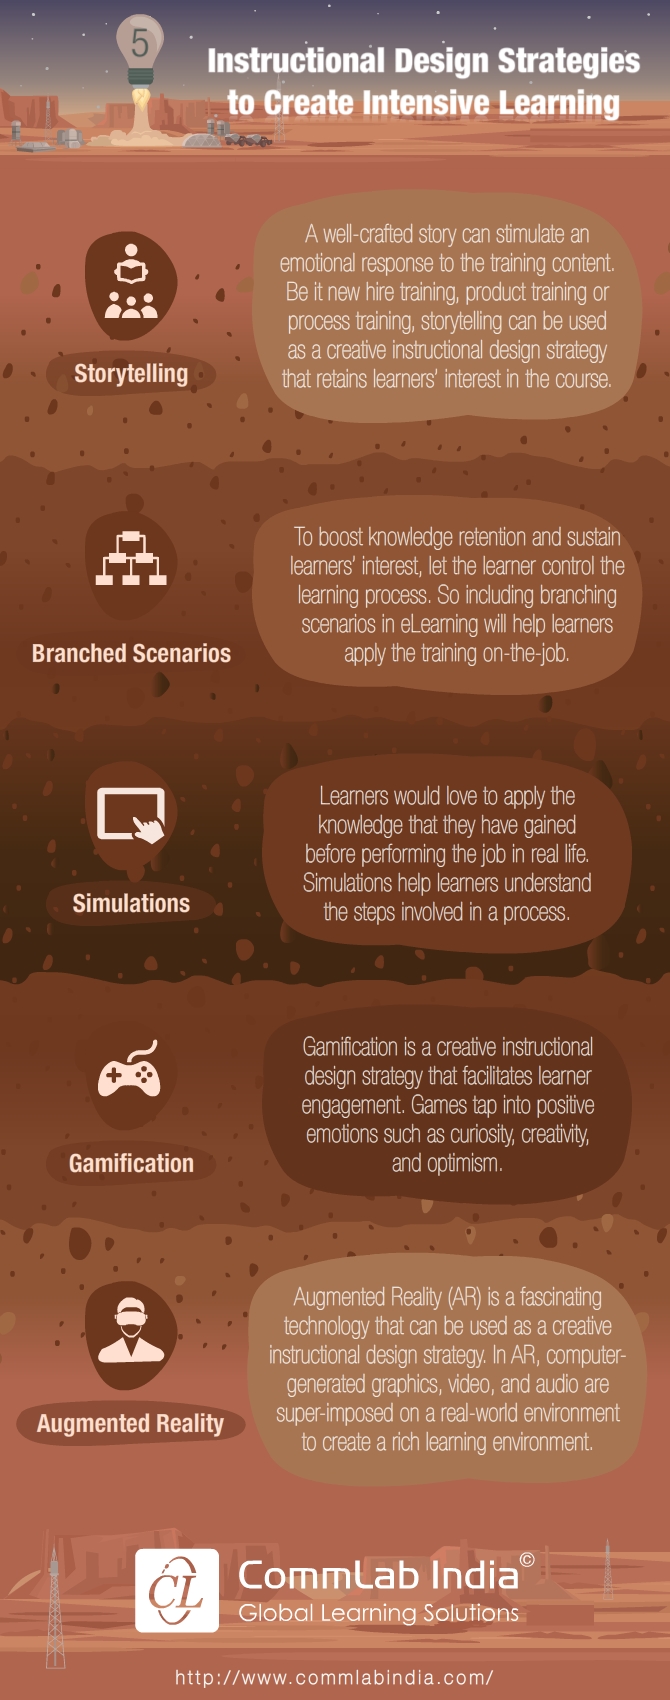 5 Instructional Design Strategies to Create Intensive Learning [Infographic]